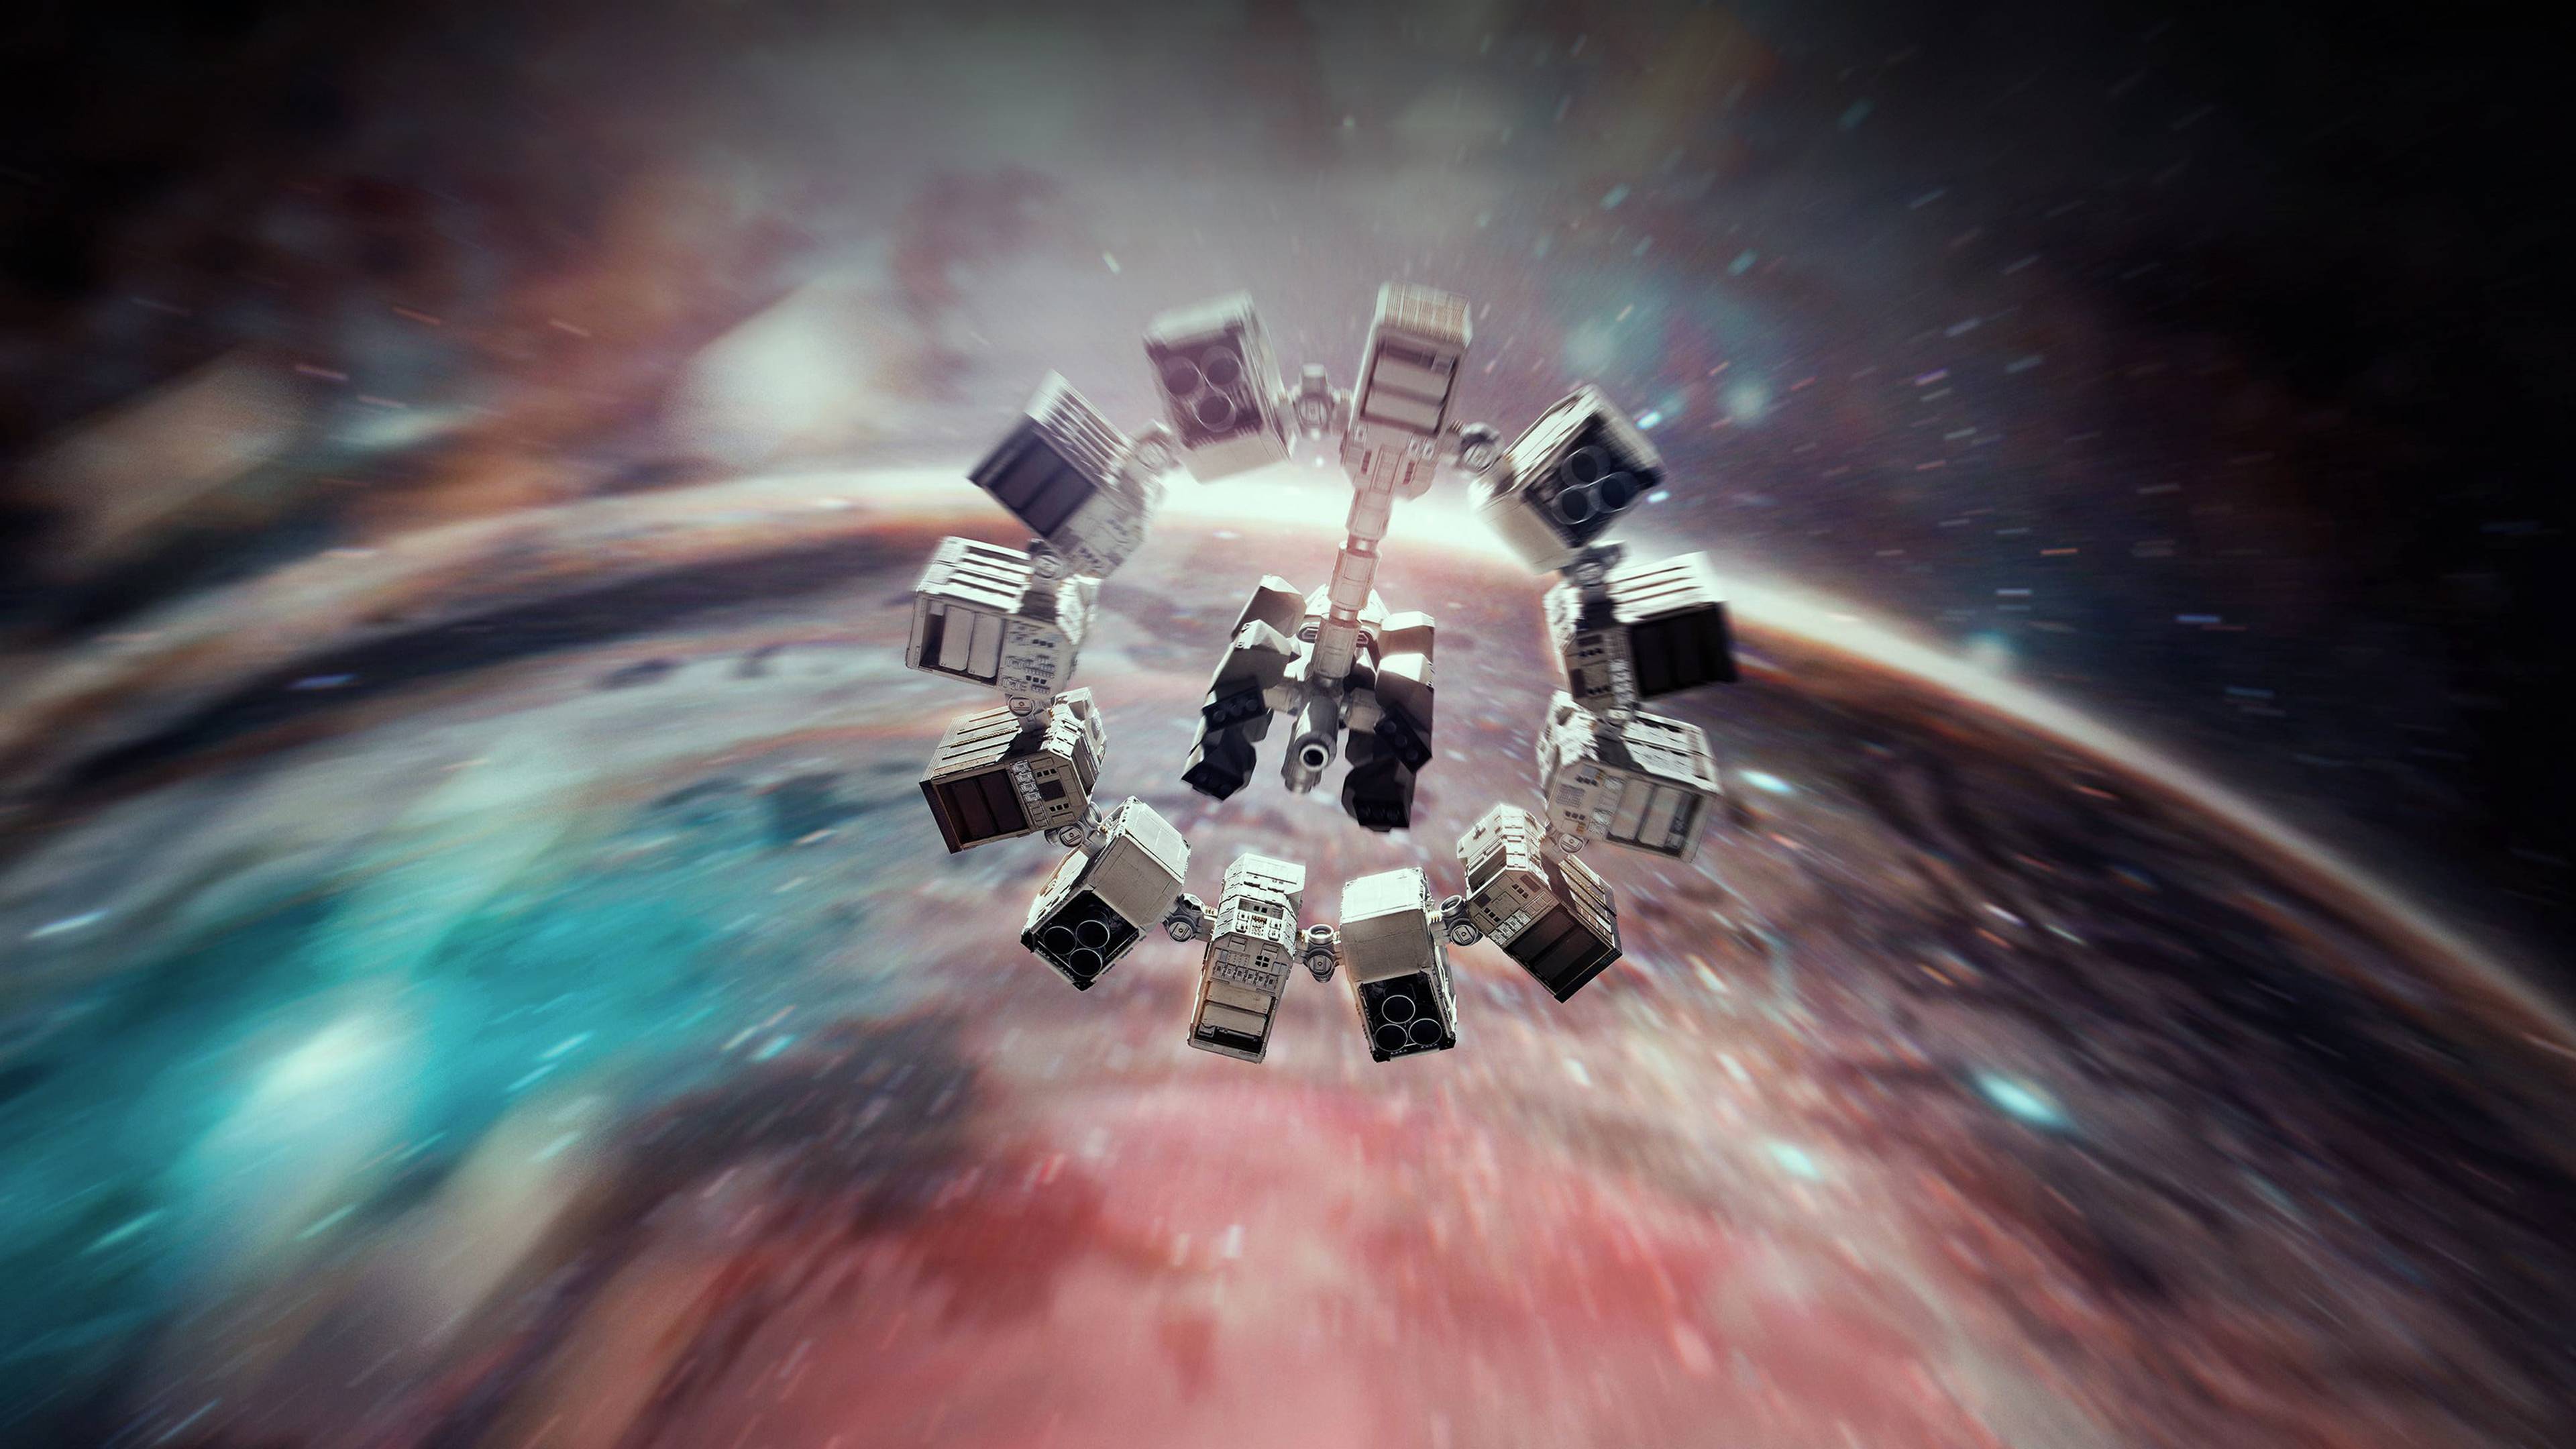 interstellar wallpaper 4k,space,outer space,graphic design,world,graphics